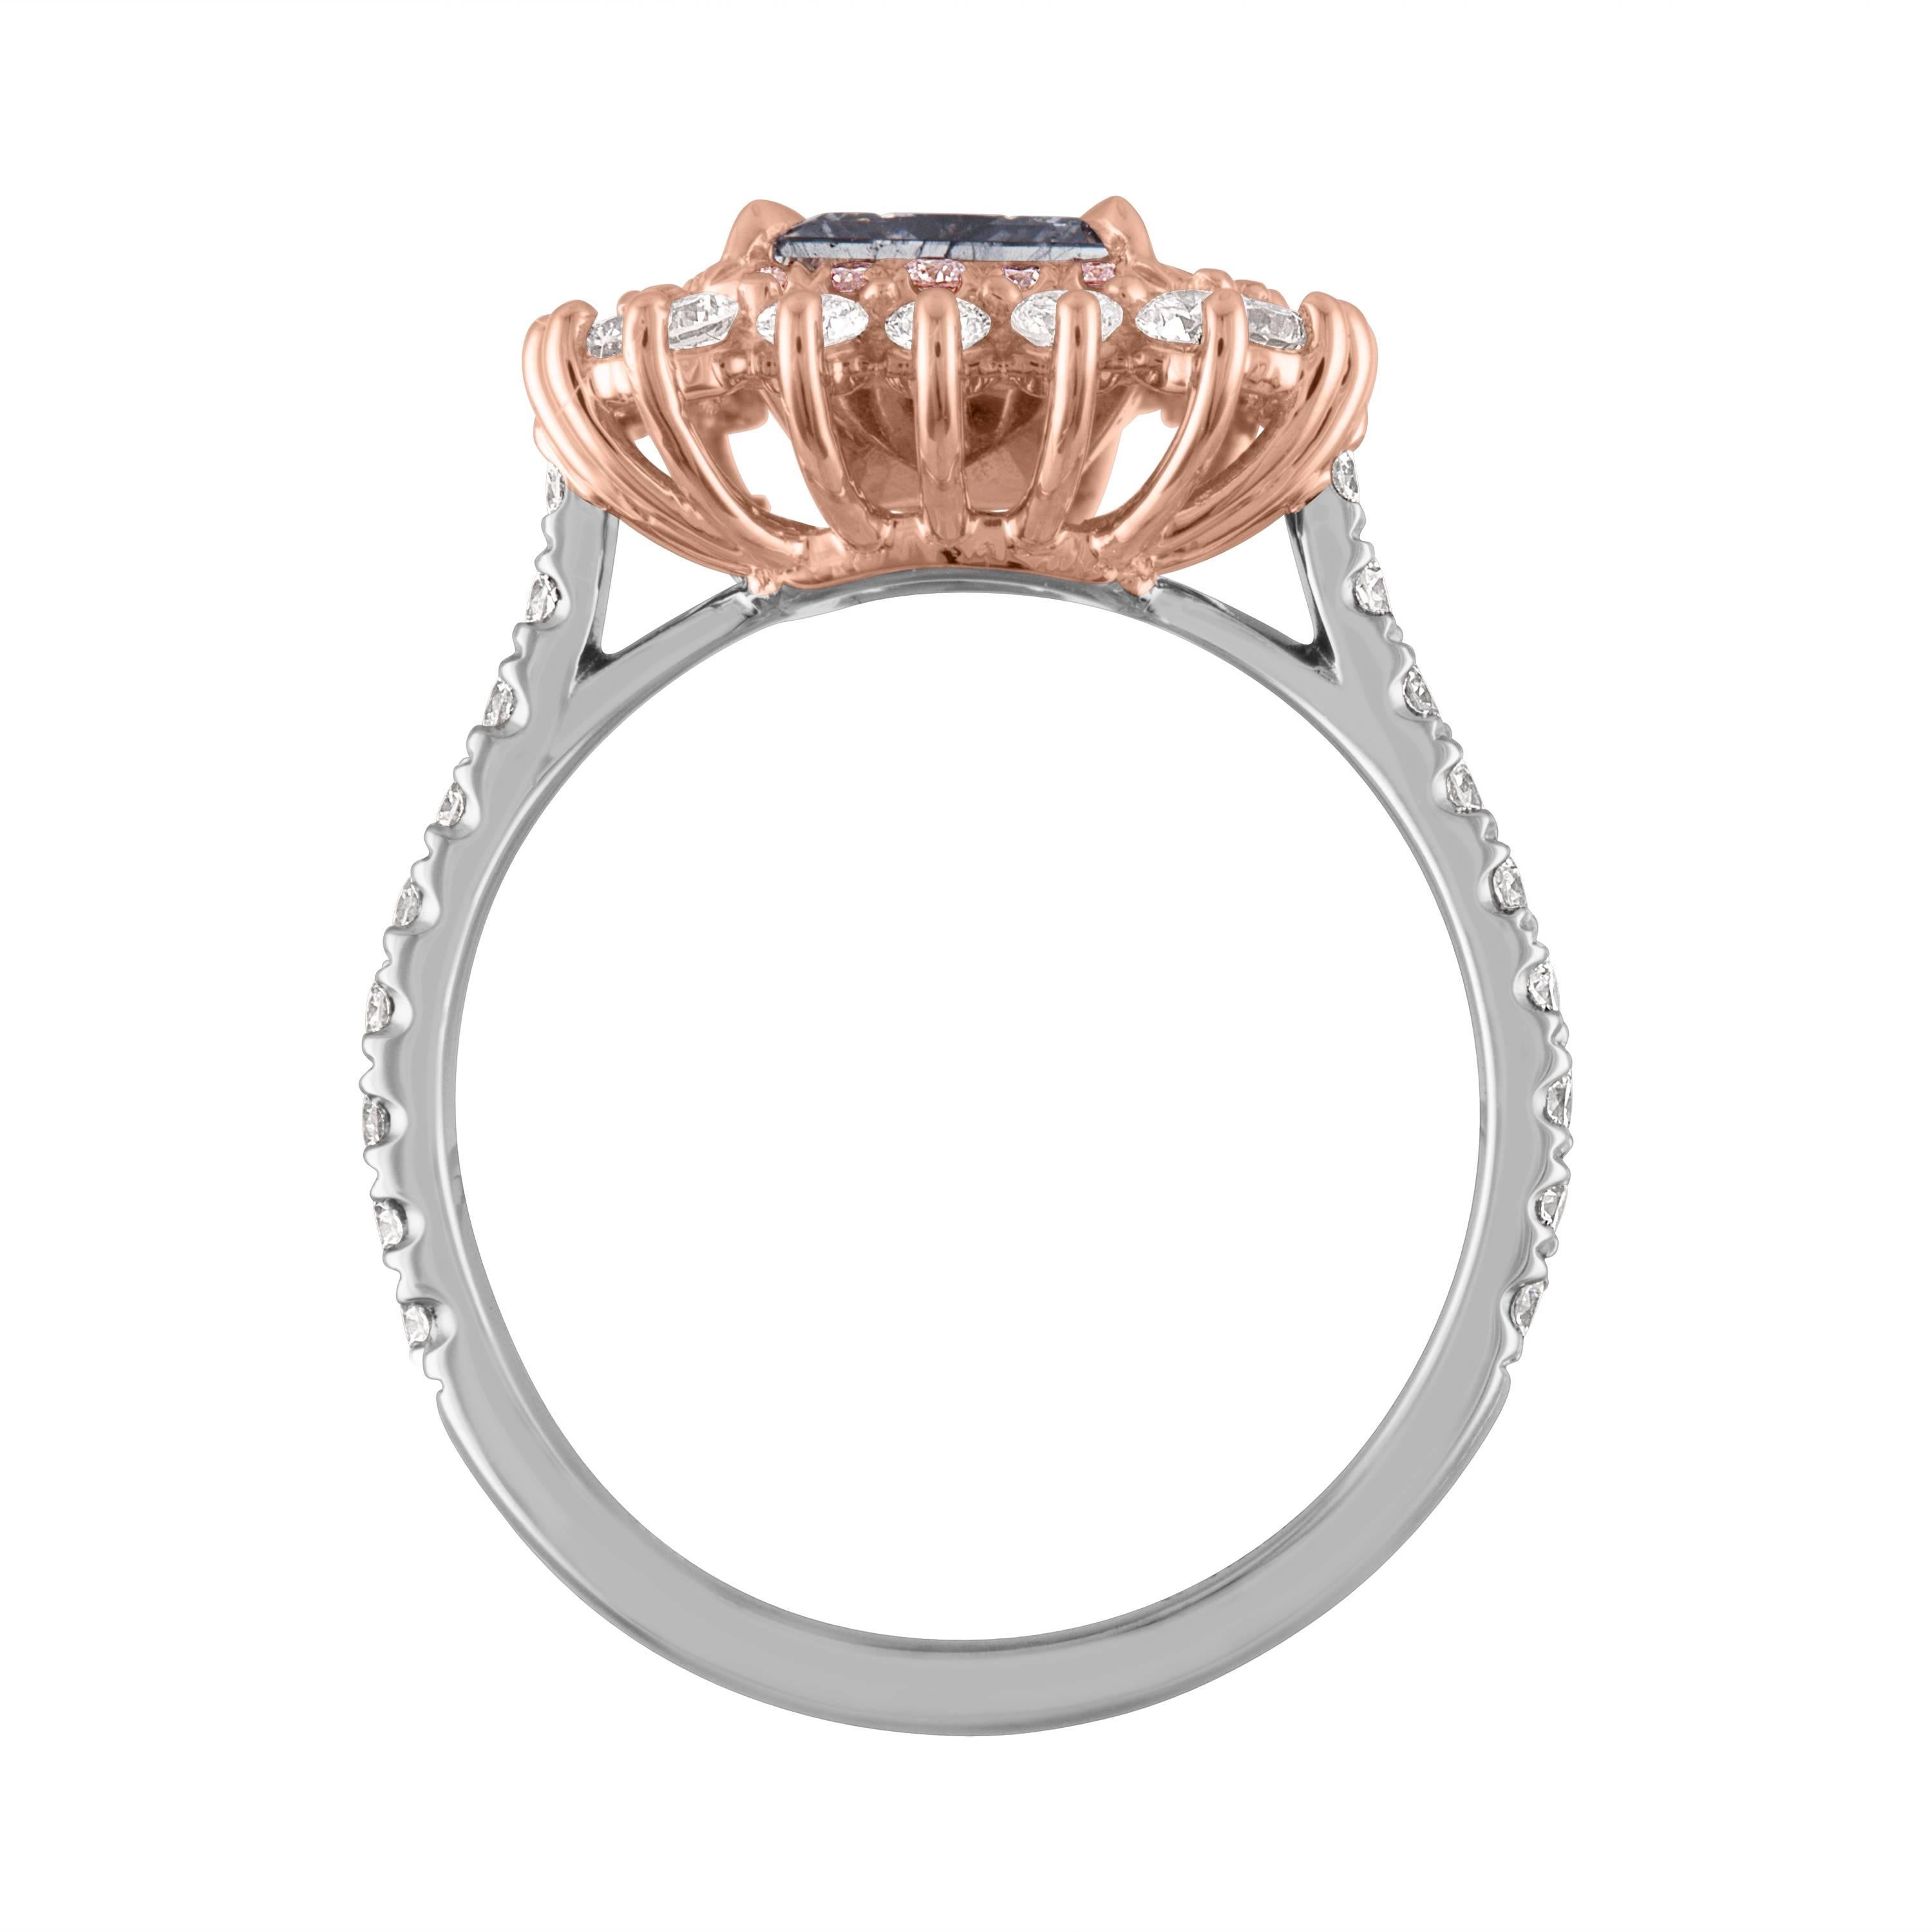 GIA Certified Princess Cut Diamond As Fancy Blue Gray.
GIA Certificate Number is 1176087054
This Princess Cut Diamond is set in Two Tone Mounting, 18K Rose Gold & Platinum. Princess is surrounded with 24 Pink Round Brilliant Diamonds.  The Pink